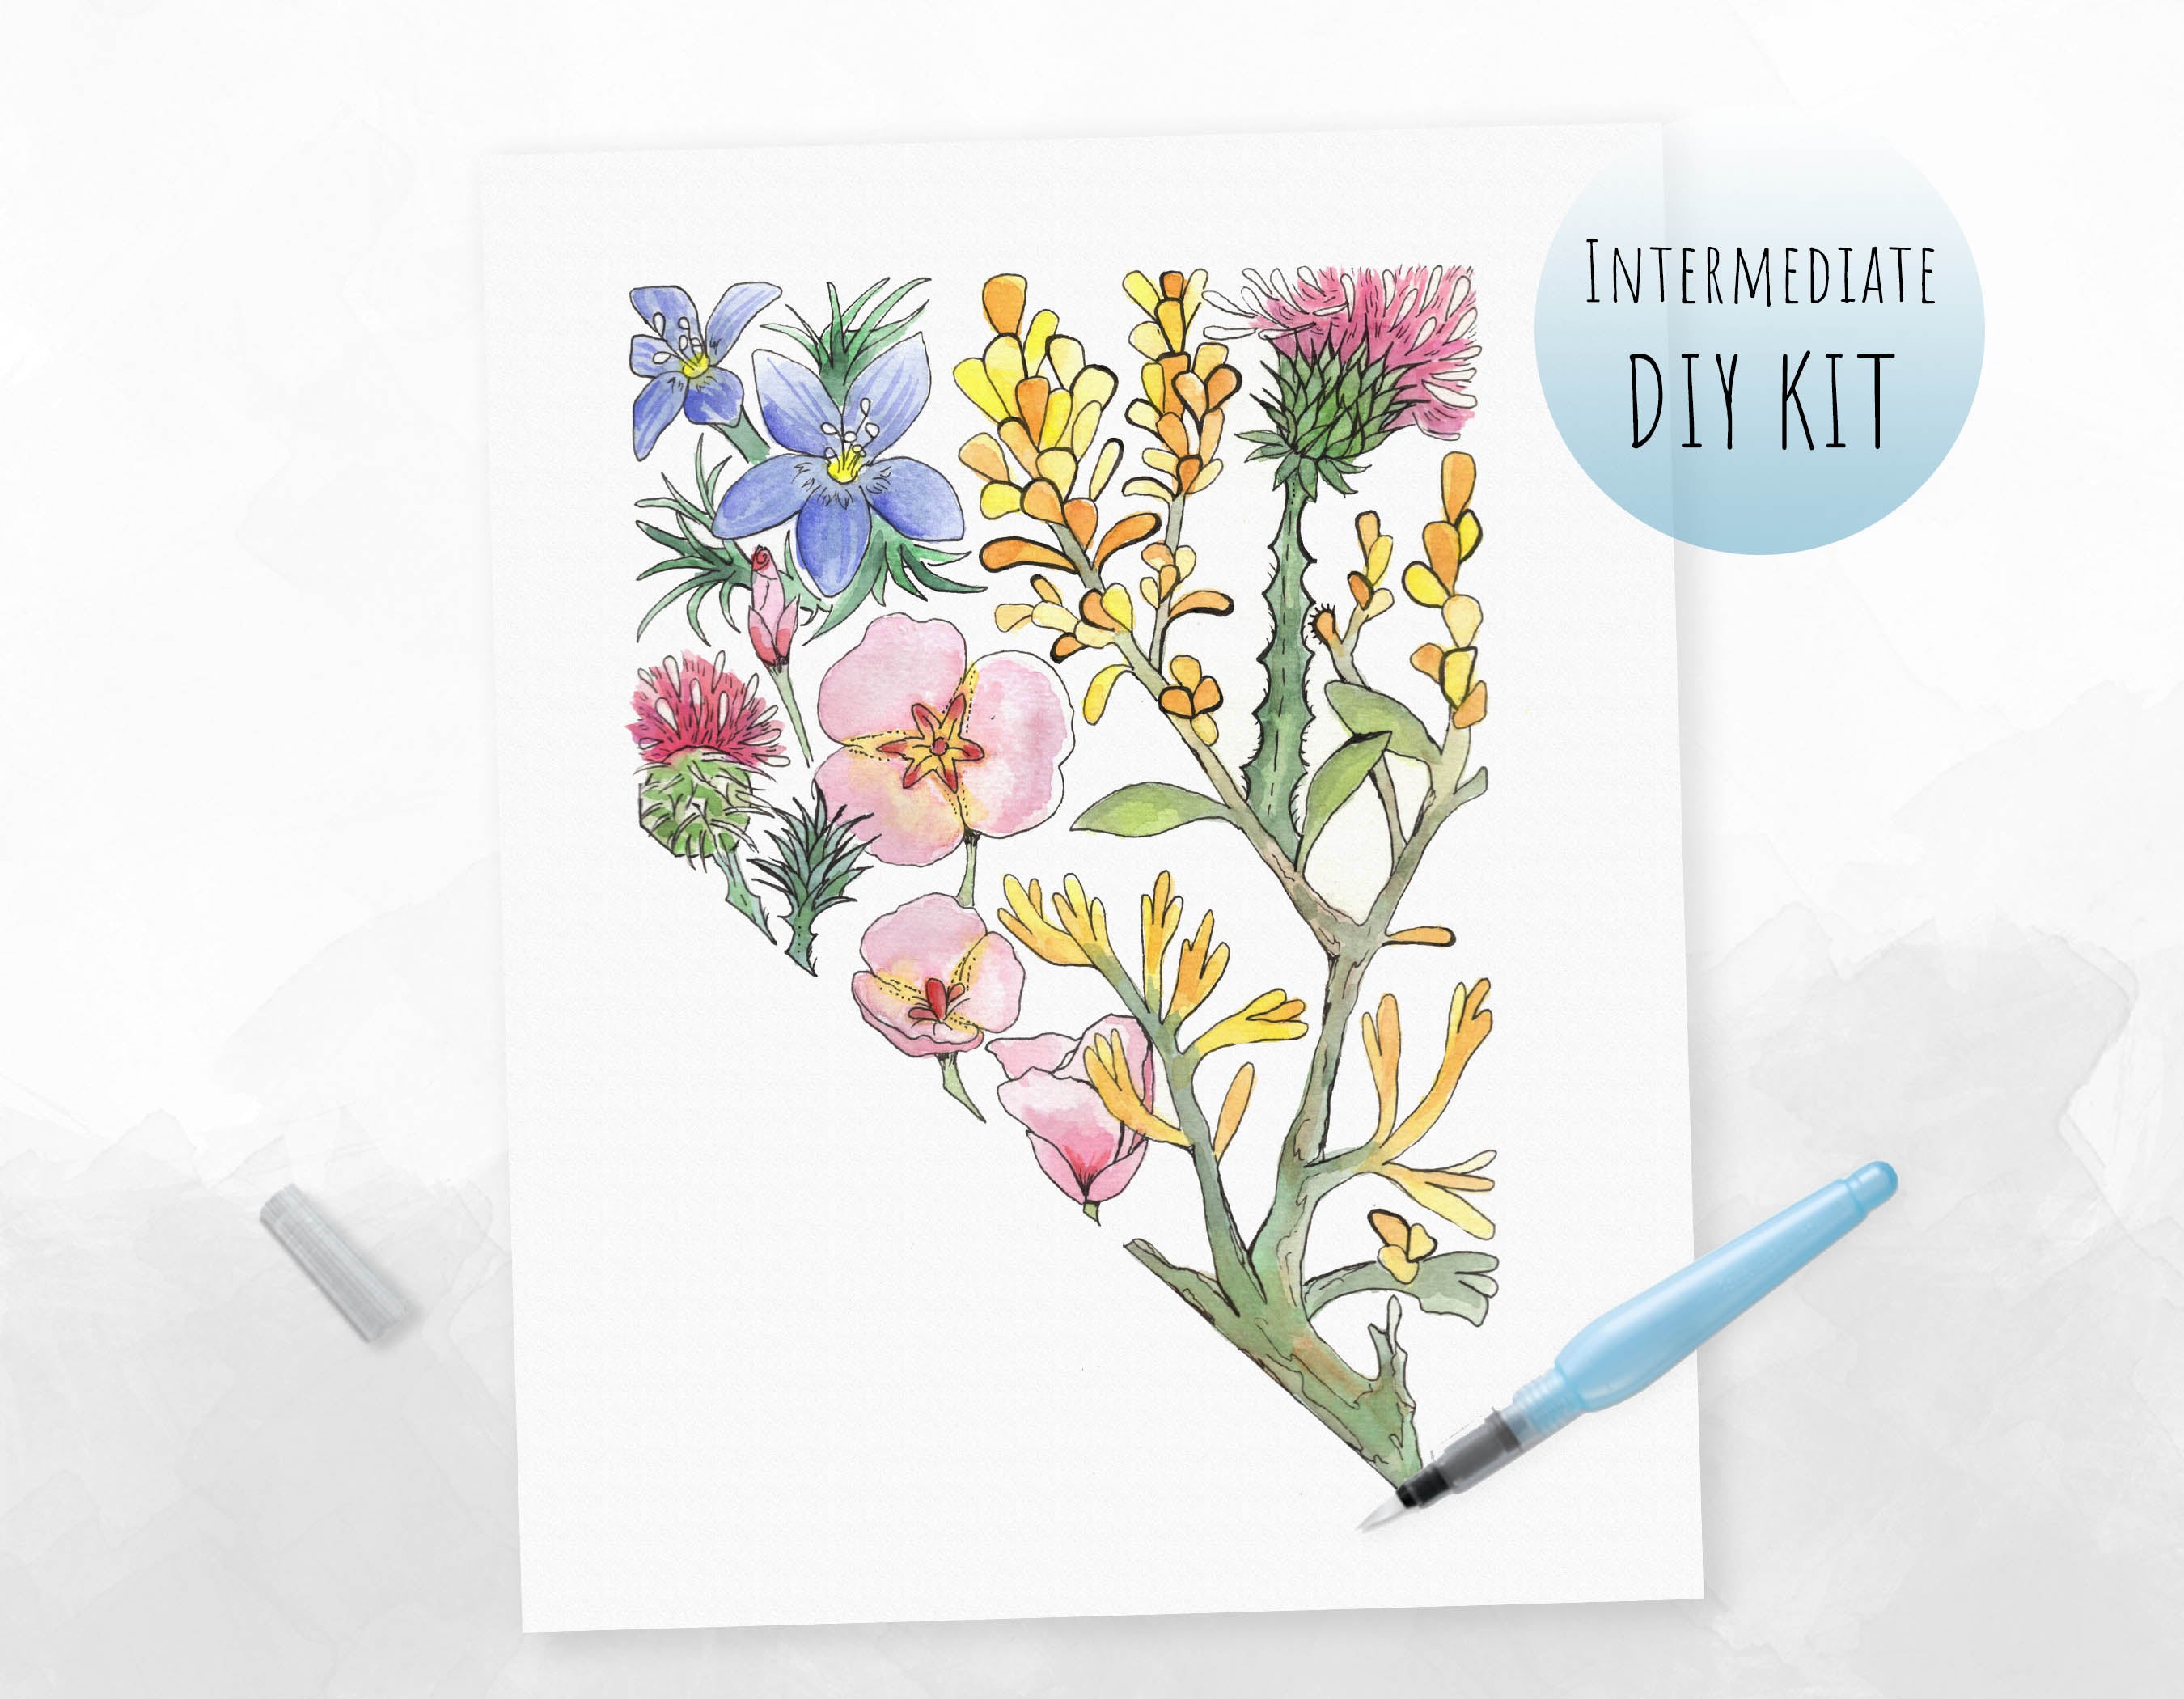 DIY KIT Watercolor New Mexico Wildflowers adult Paint Kit 